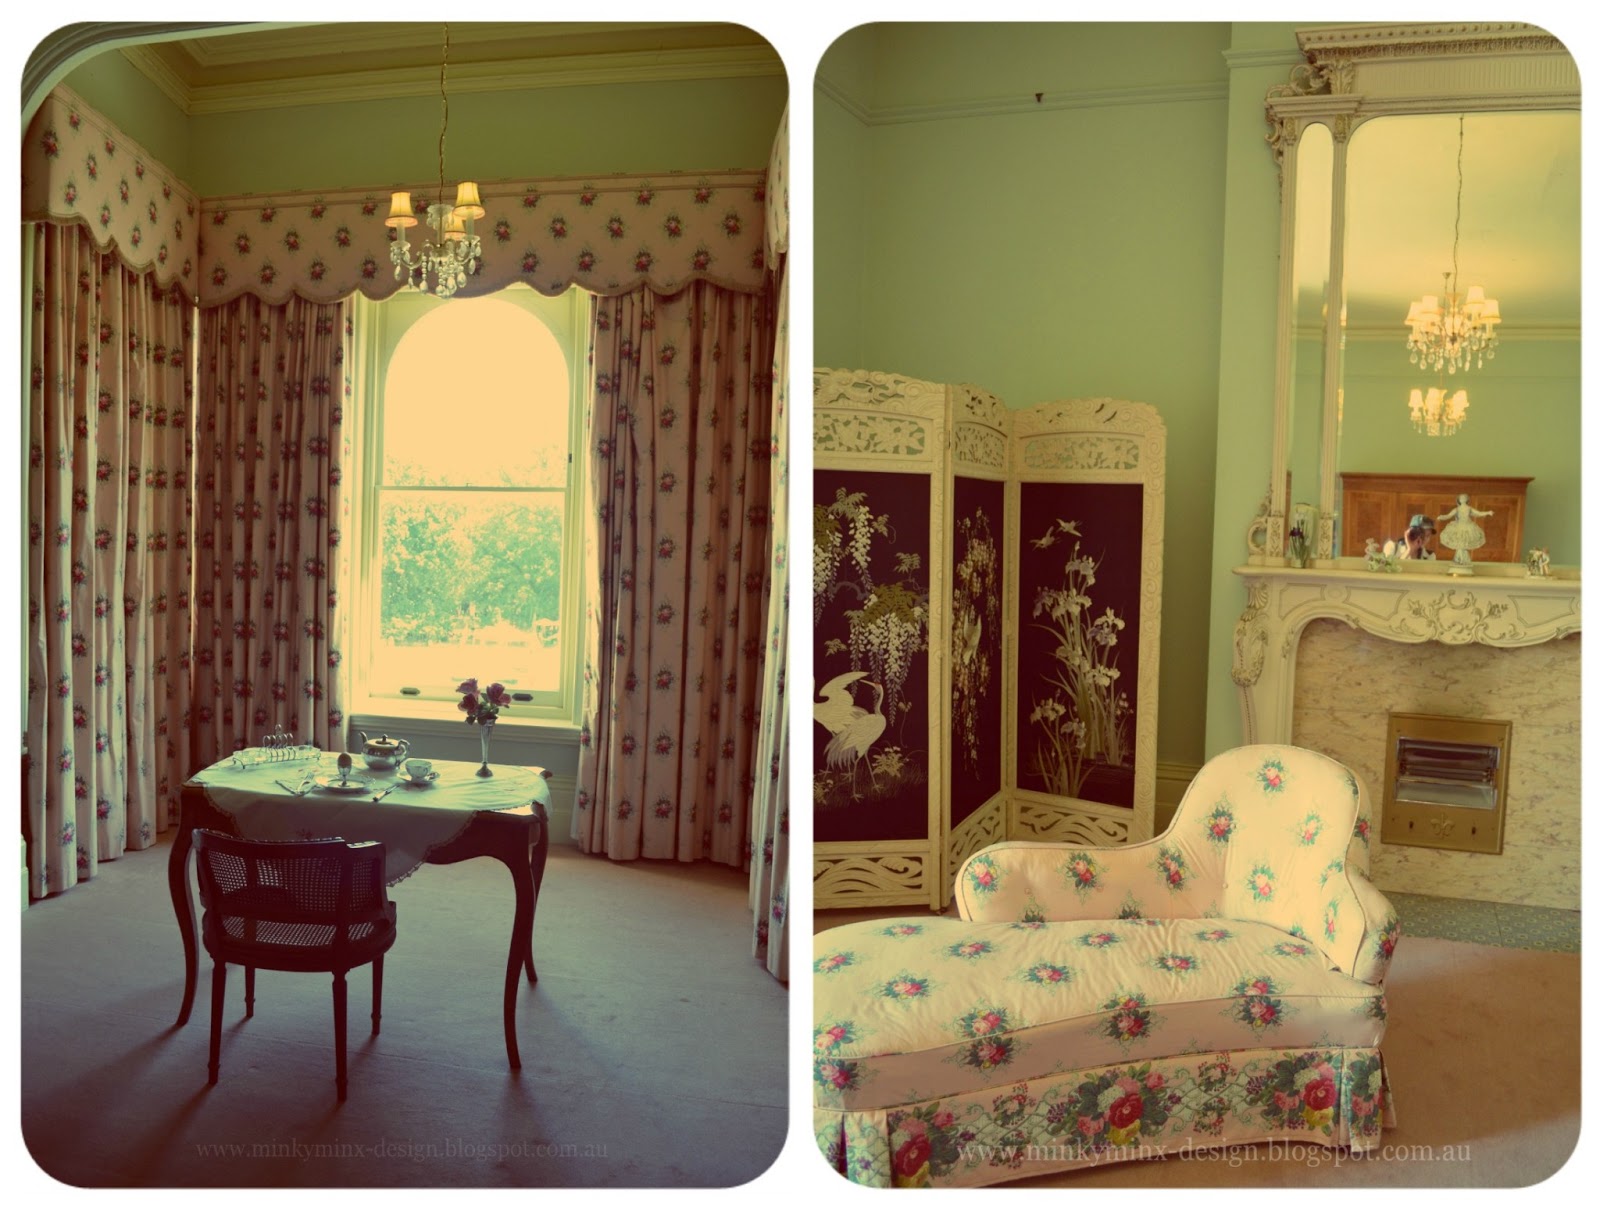 The master 'best' bedroom overlooking the lawns. Note the original  title=